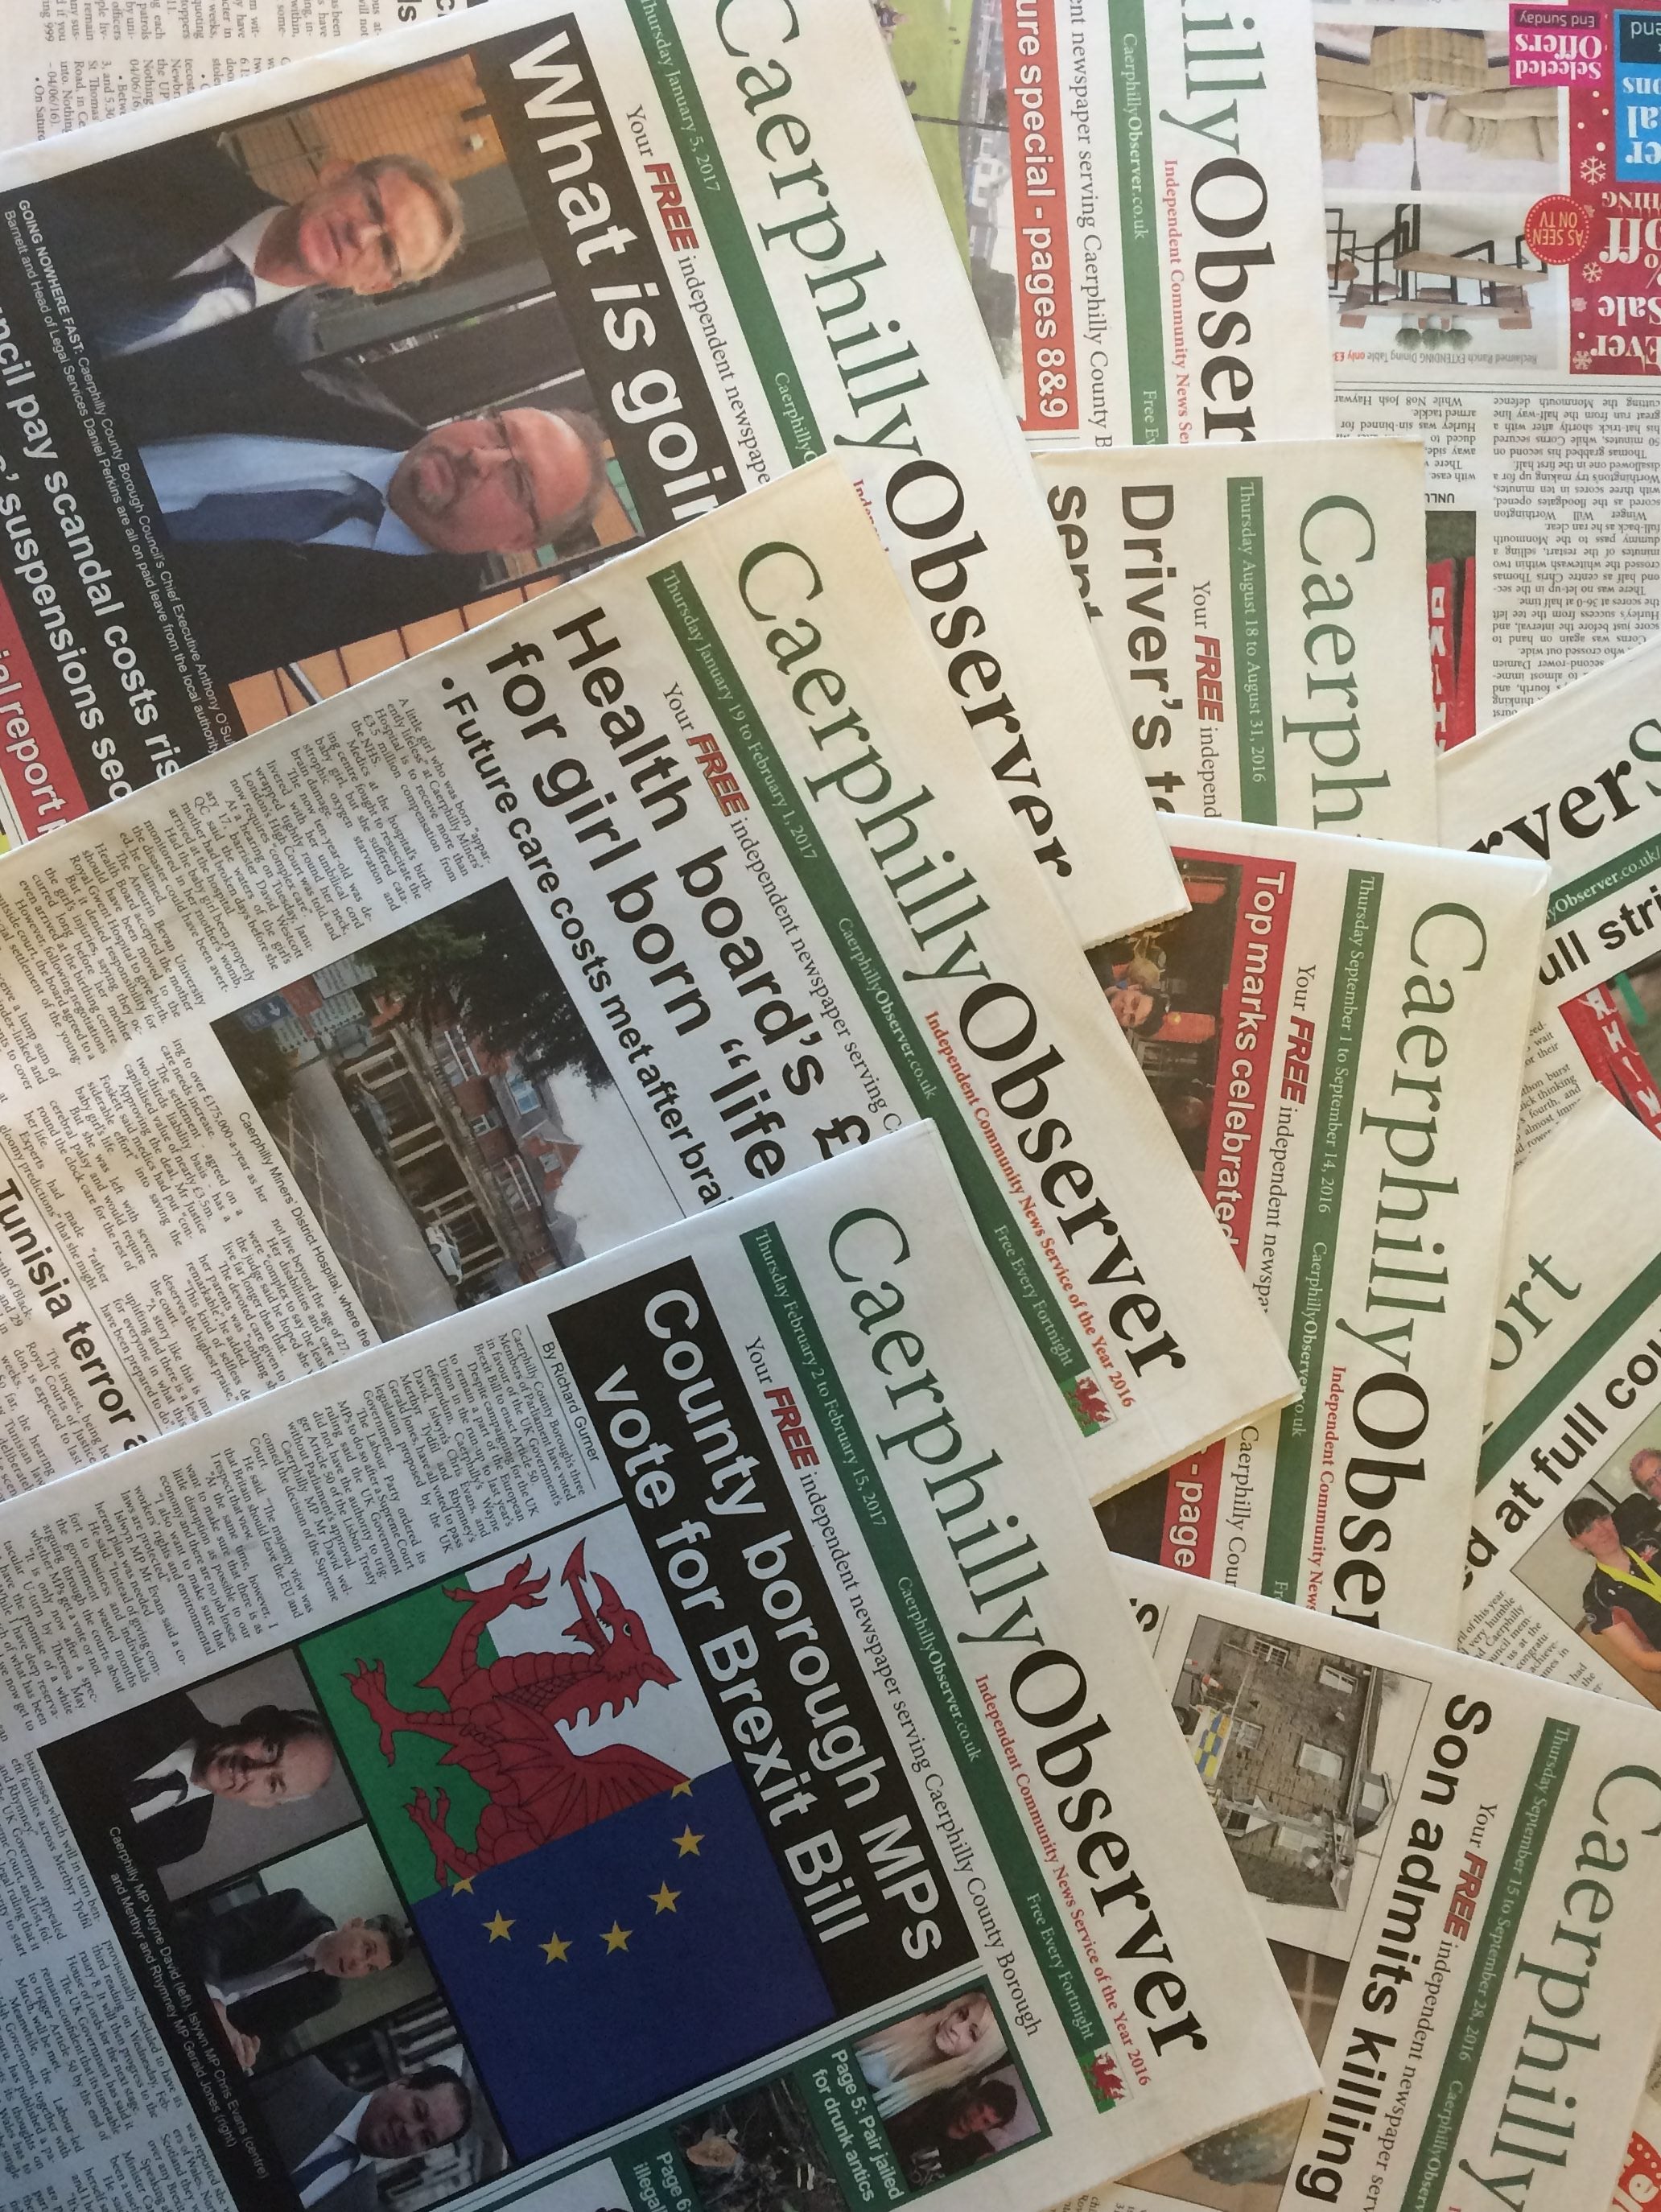 Regional publisher Iliffe Media joins IPSO along with former Impress founding member the Caerphilly Observer